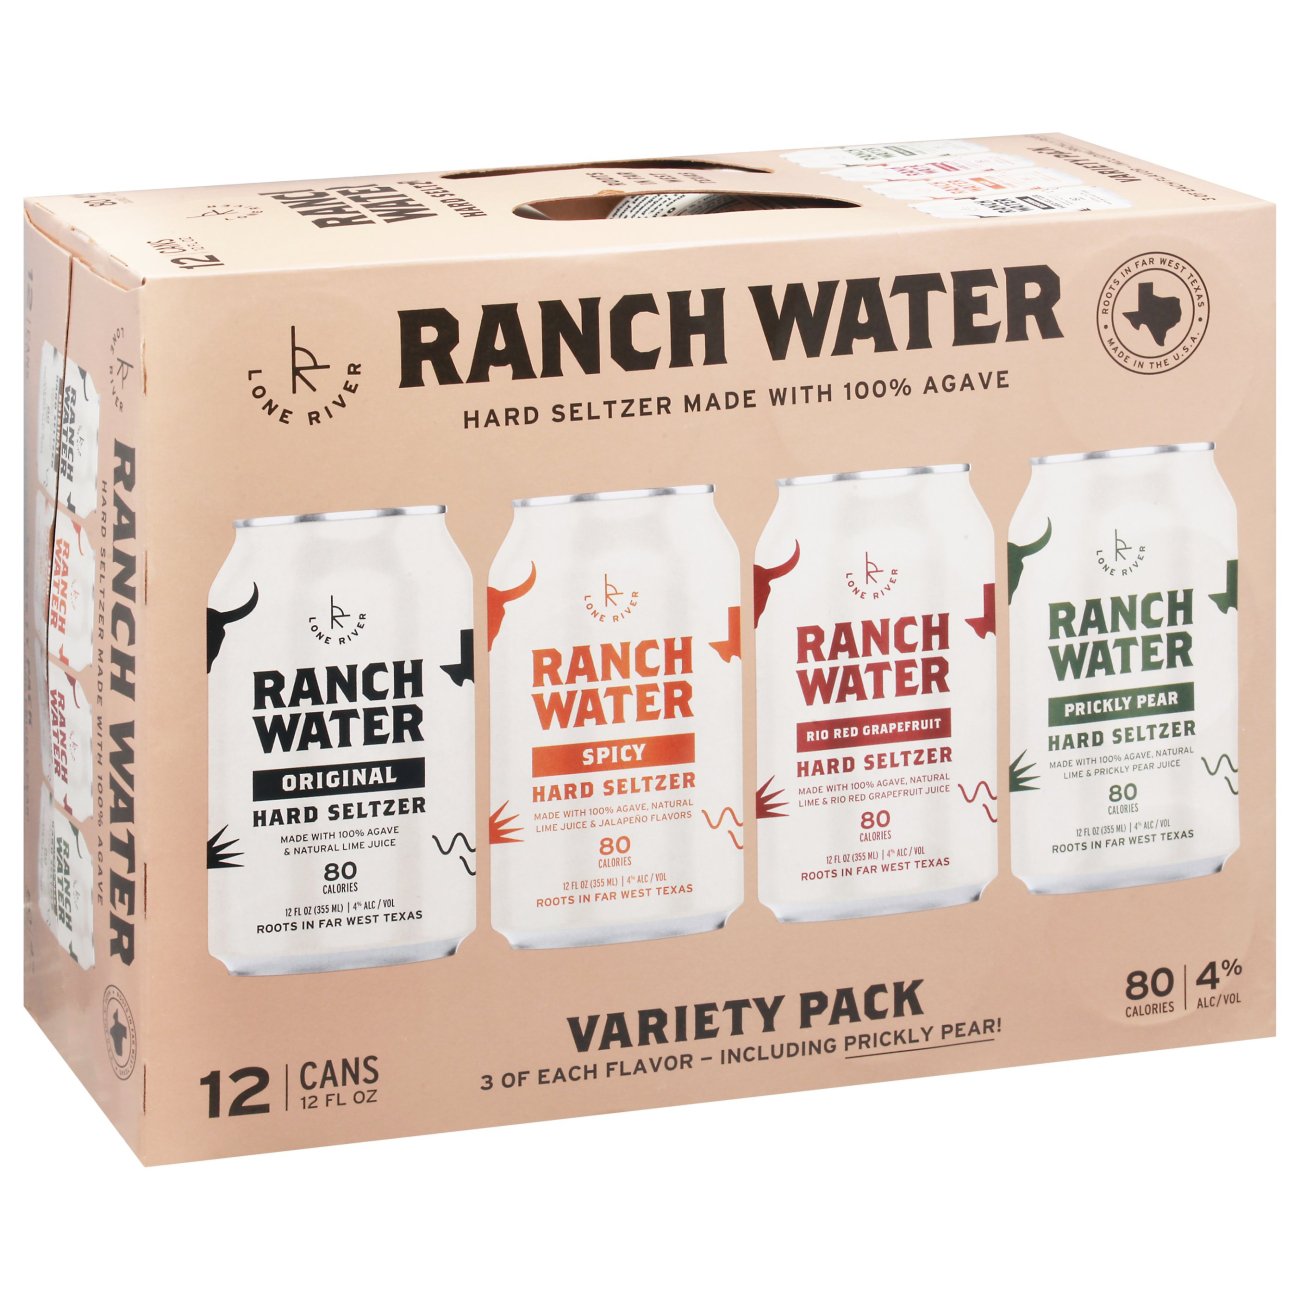 Lone River Ranch Water Review